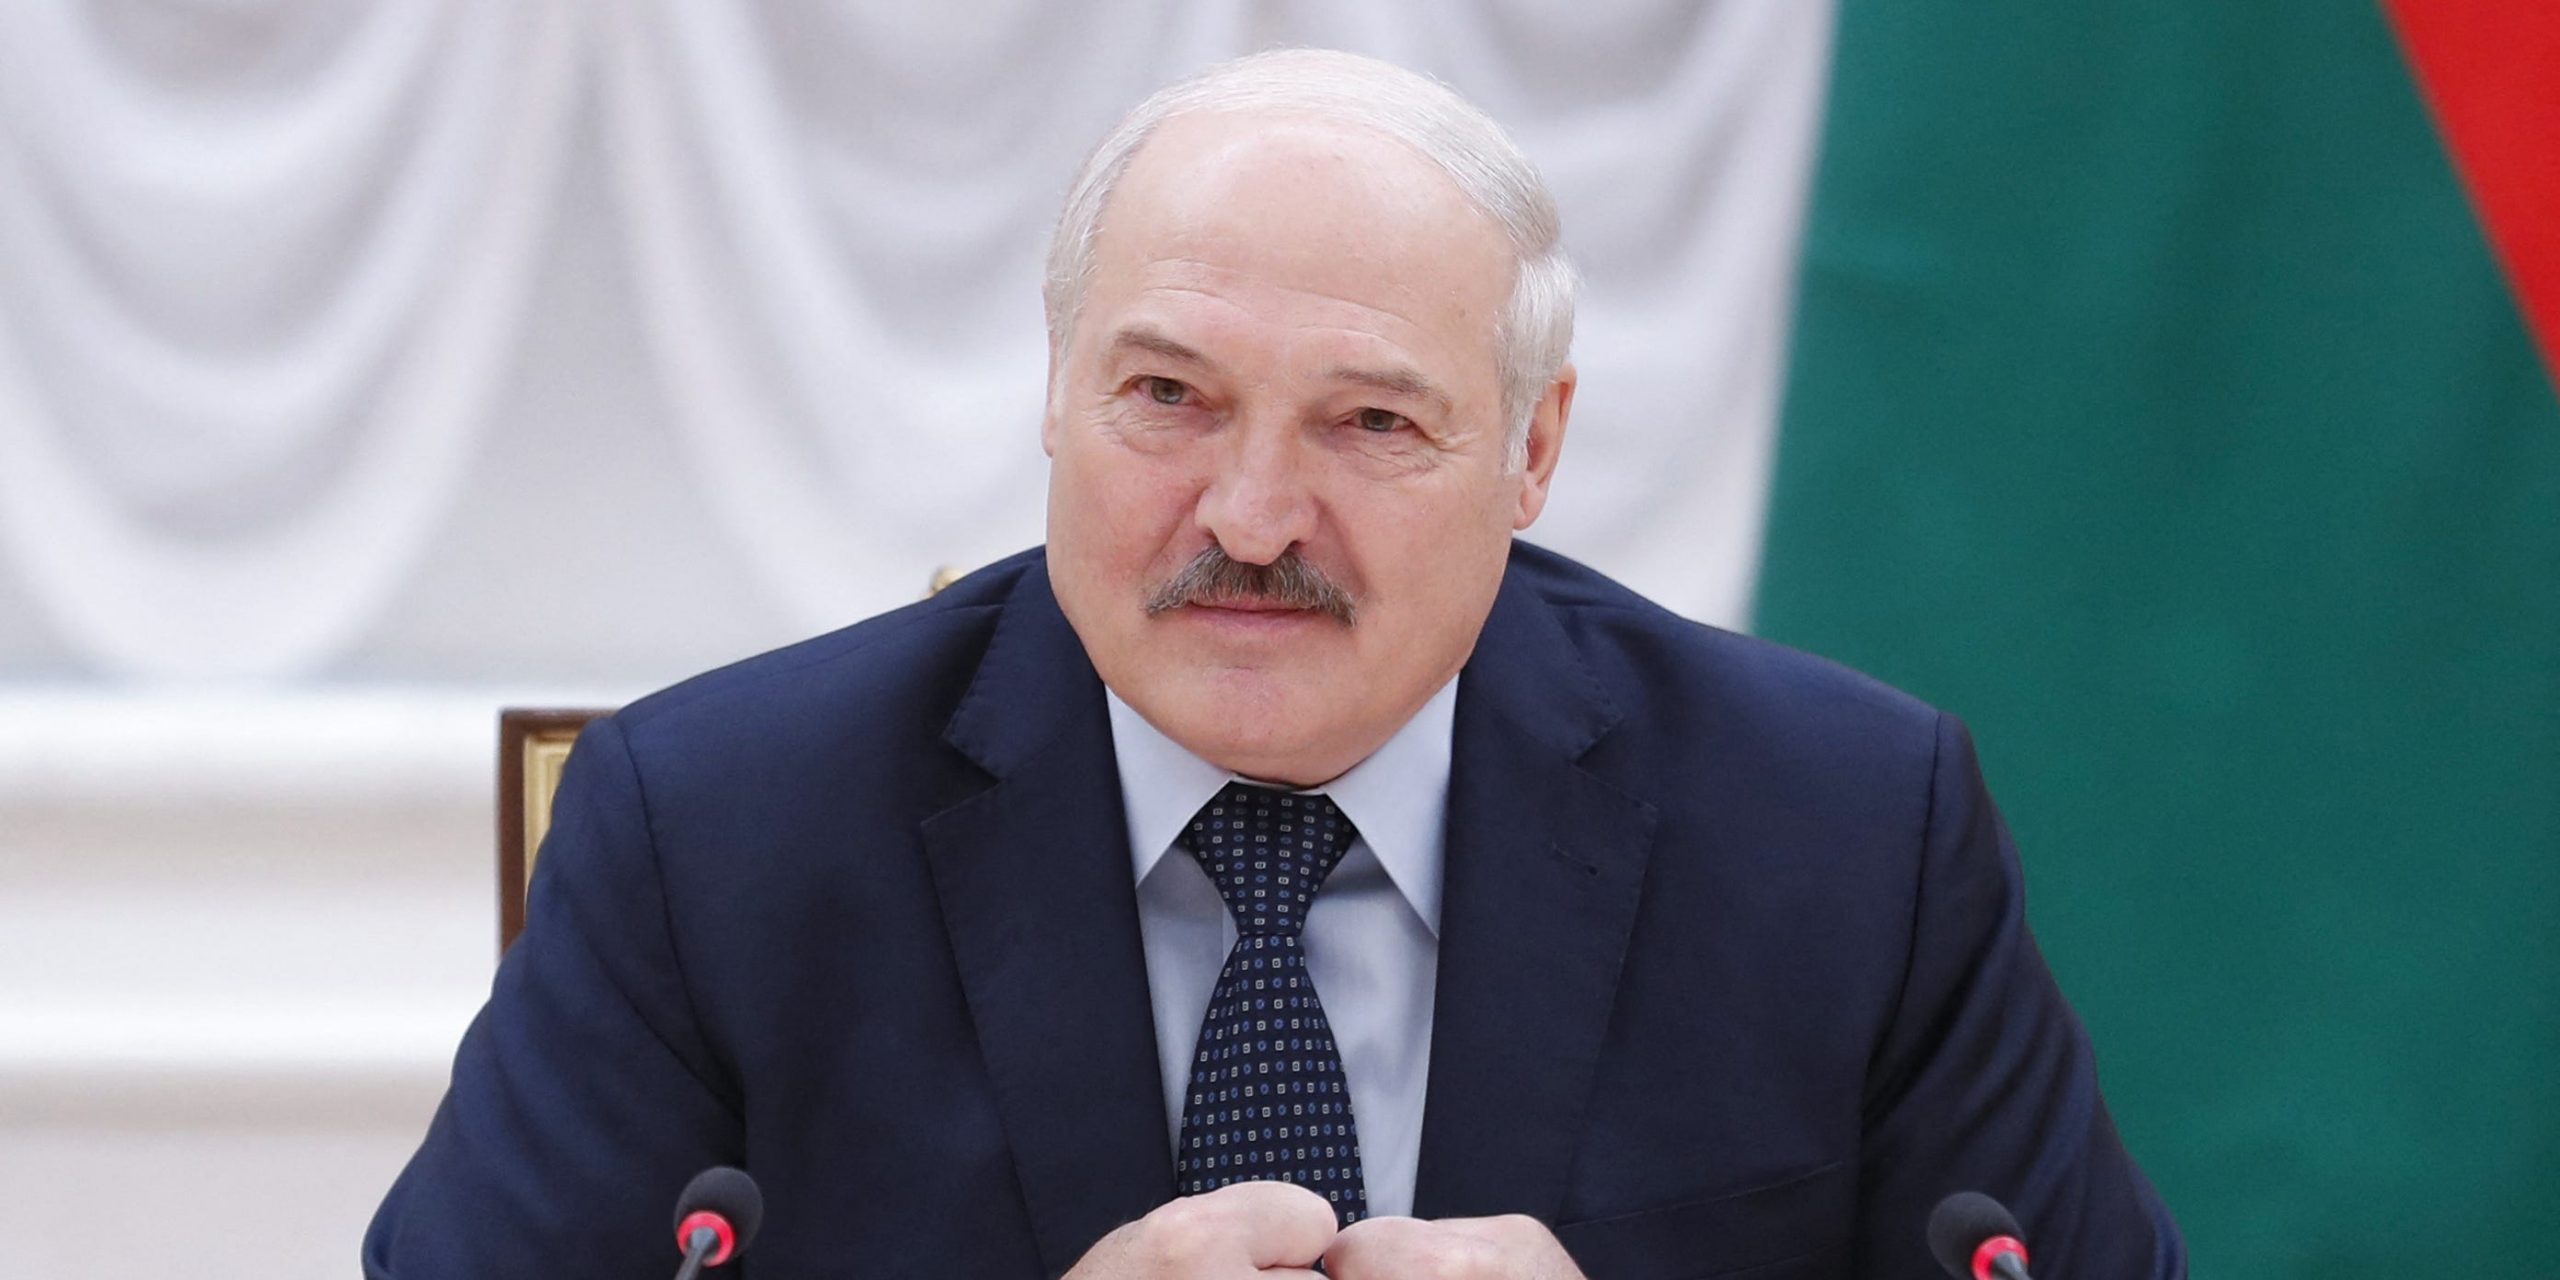 Belarusian President Alexander Lukashenko speaks during a meeting with Commonwealth of Independent States officials in Minsk on May 28, 2021.